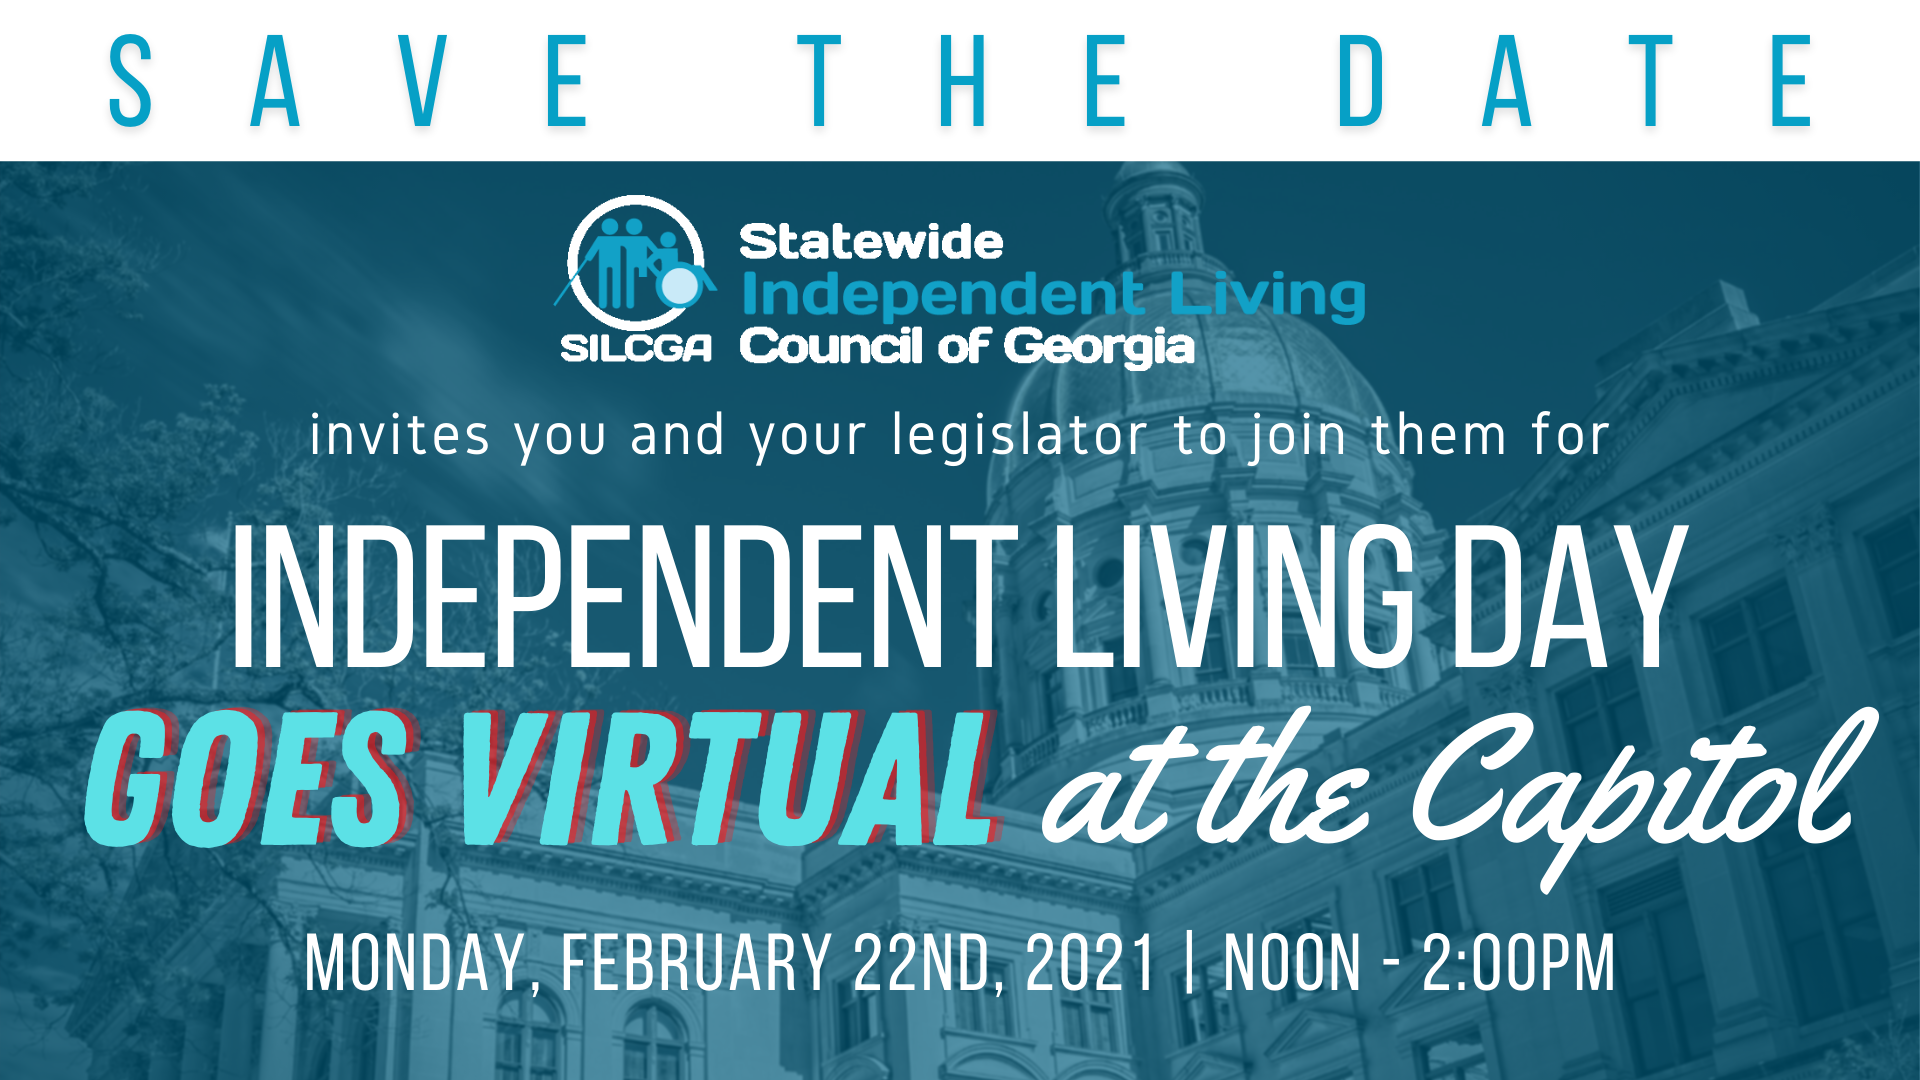 Save the Date: SILCGA logo invites you and your legislator to join them for Independent Living Day Goes Virtual at the Capitol Monday, February 22nd, 2021 | Noon - 2PM